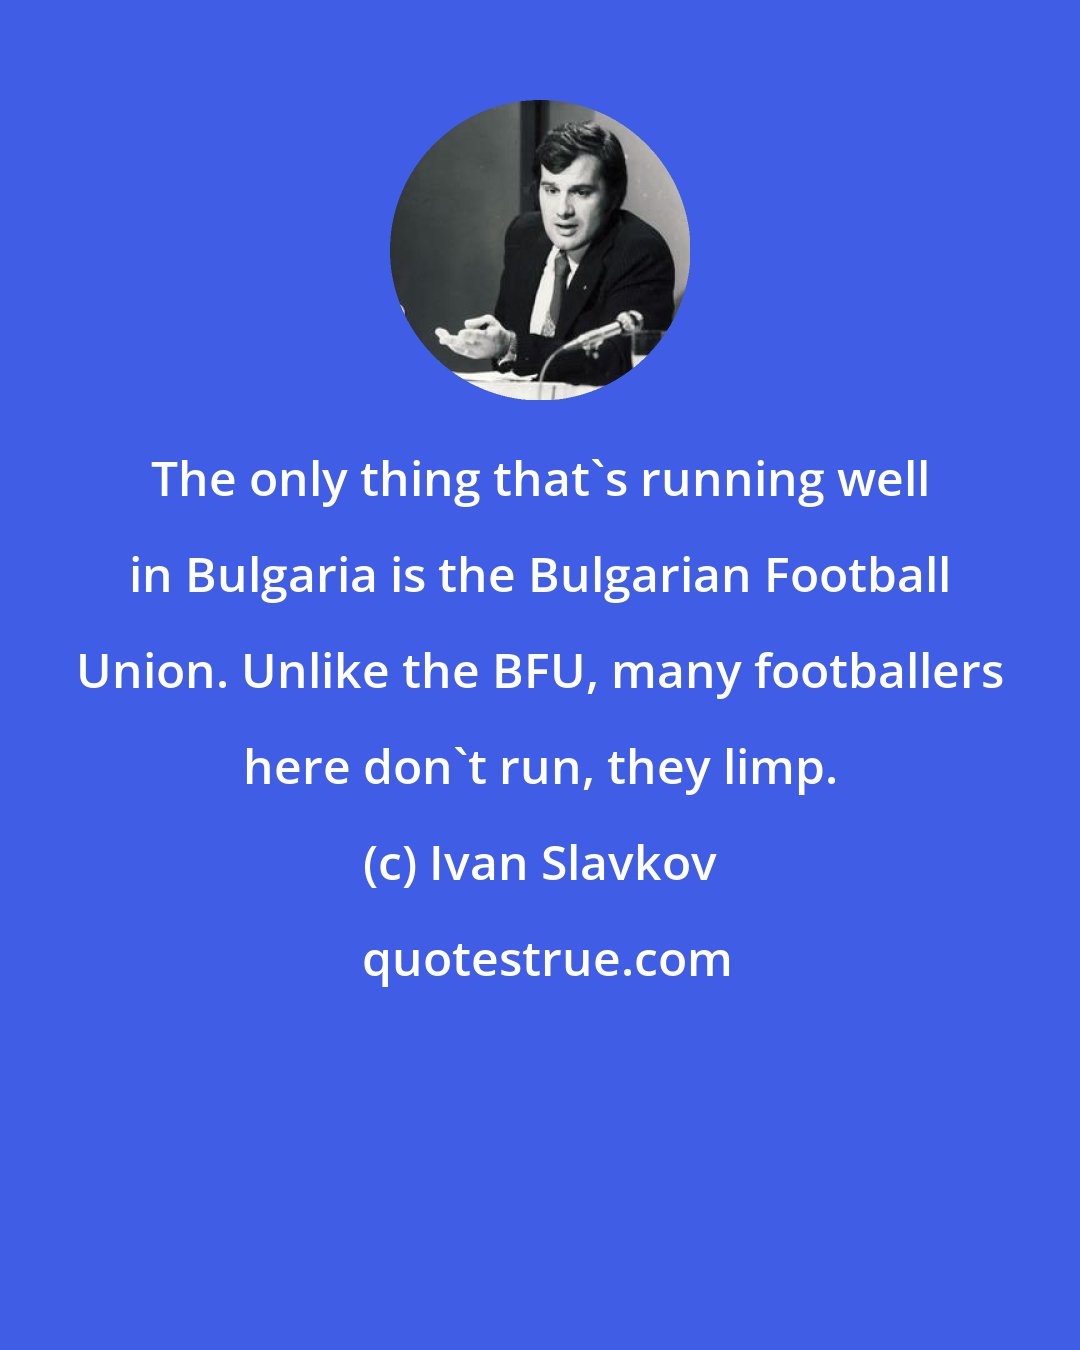 Ivan Slavkov: The only thing that's running well in Bulgaria is the Bulgarian Football Union. Unlike the BFU, many footballers here don't run, they limp.